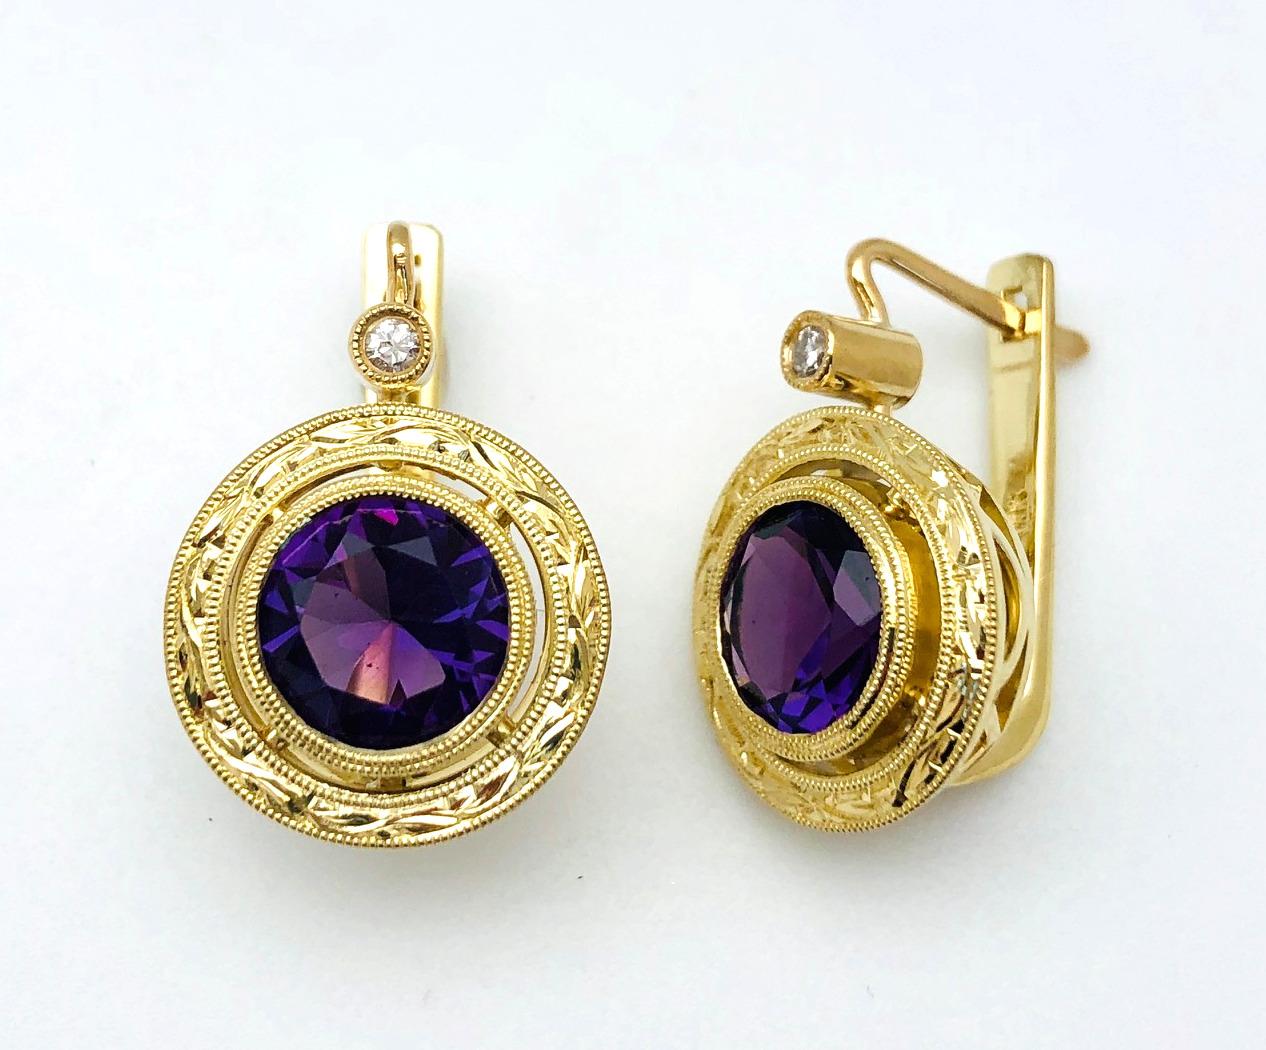 Part of our Day to Night Collection, these 18k yellow gold earrings feature orchid colored amethysts set in beautiful handmade bezels. The double milgrain border and detailed engraving display the exceptional artisanship that is part of our